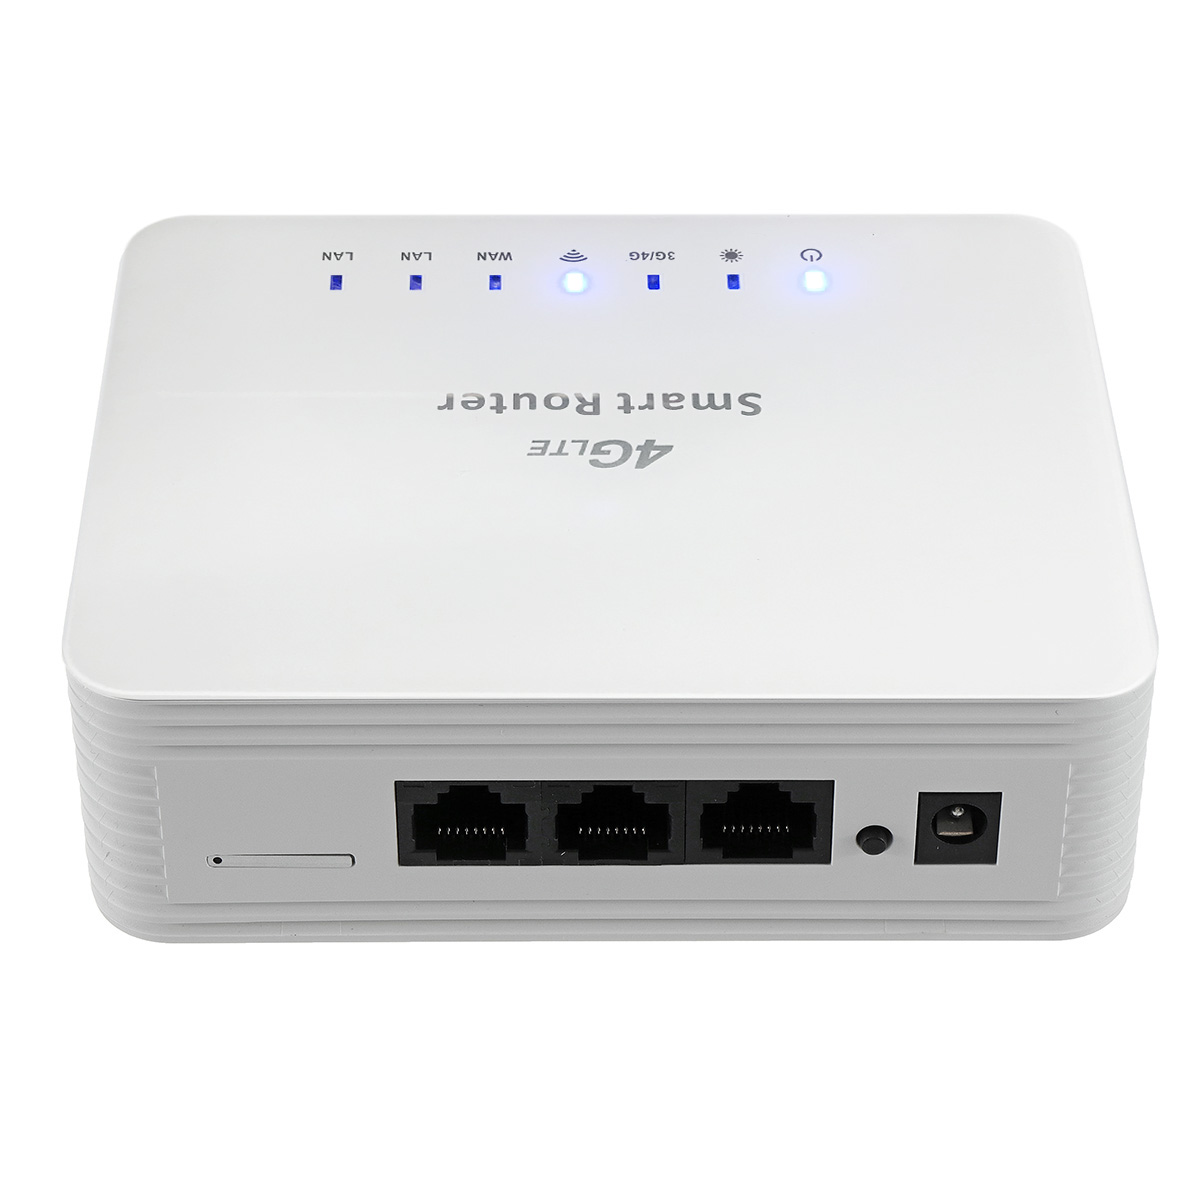 300Mbps-4G-LTE-CPE-Router-LED-Indicator-24G-Mobile-Wireless-Router-SIM-Card-Holder-Wifi-LAN-Adapter-1762929